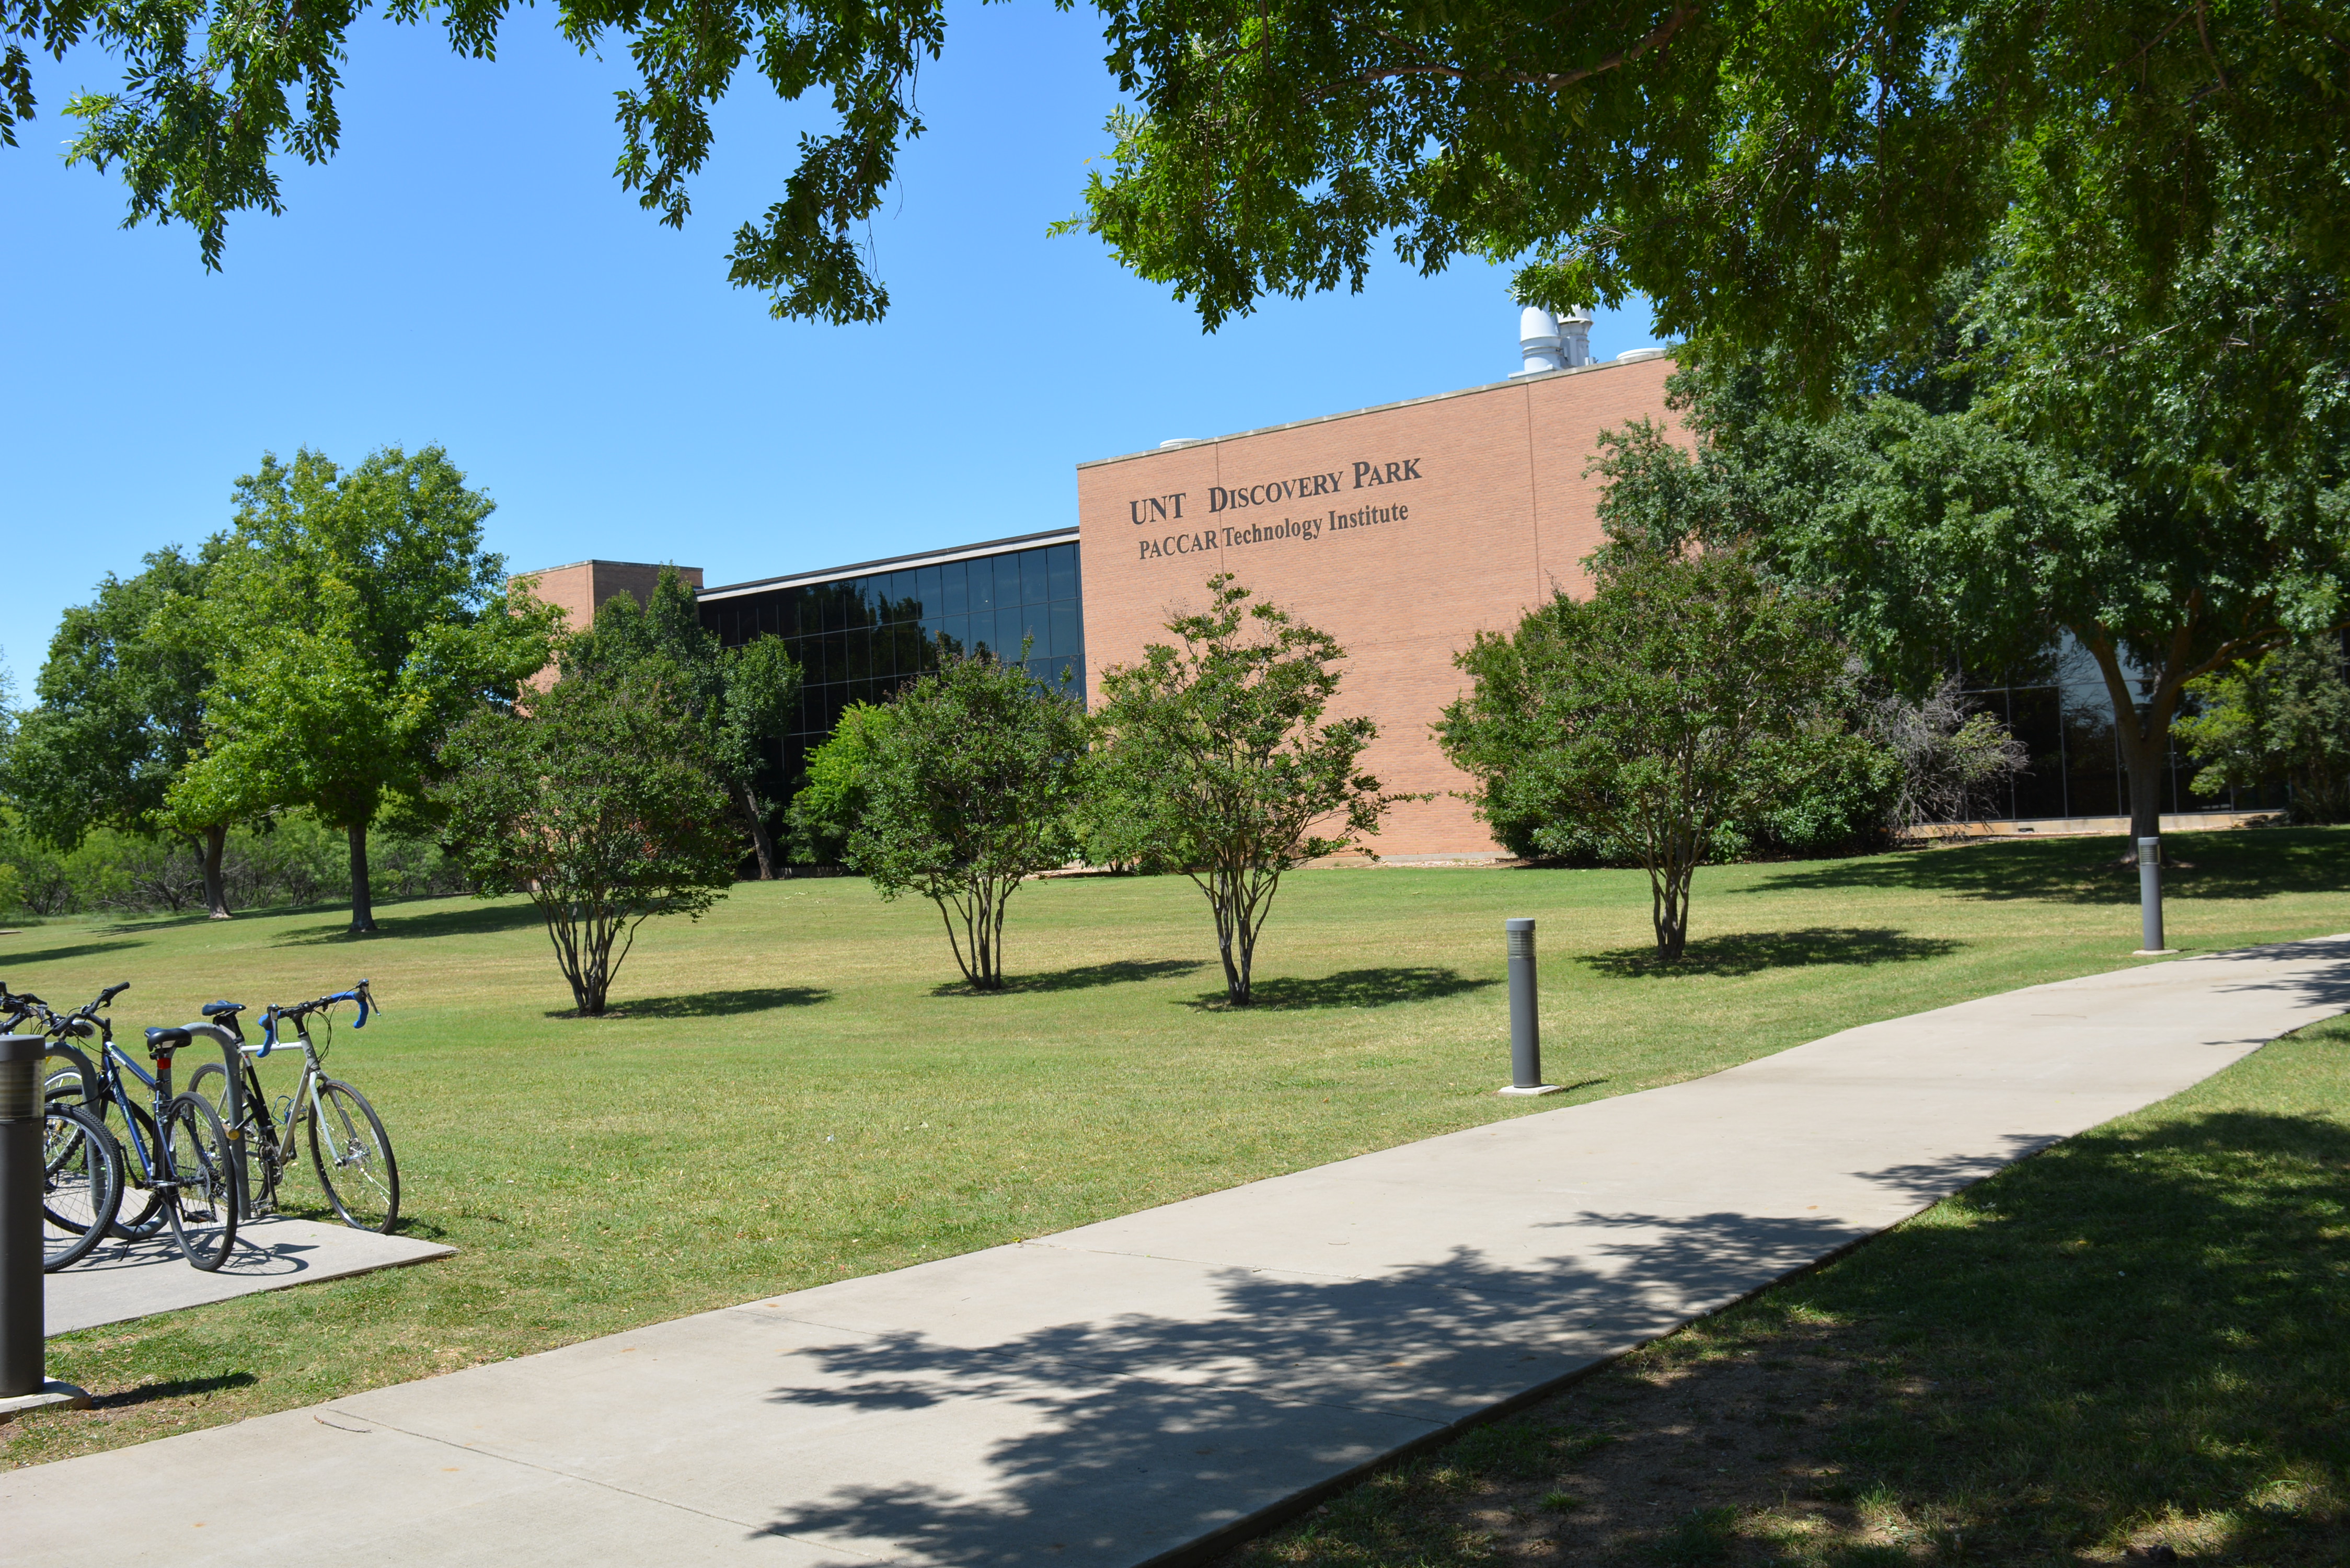 UNT Discovery Park - Home to the College of Information